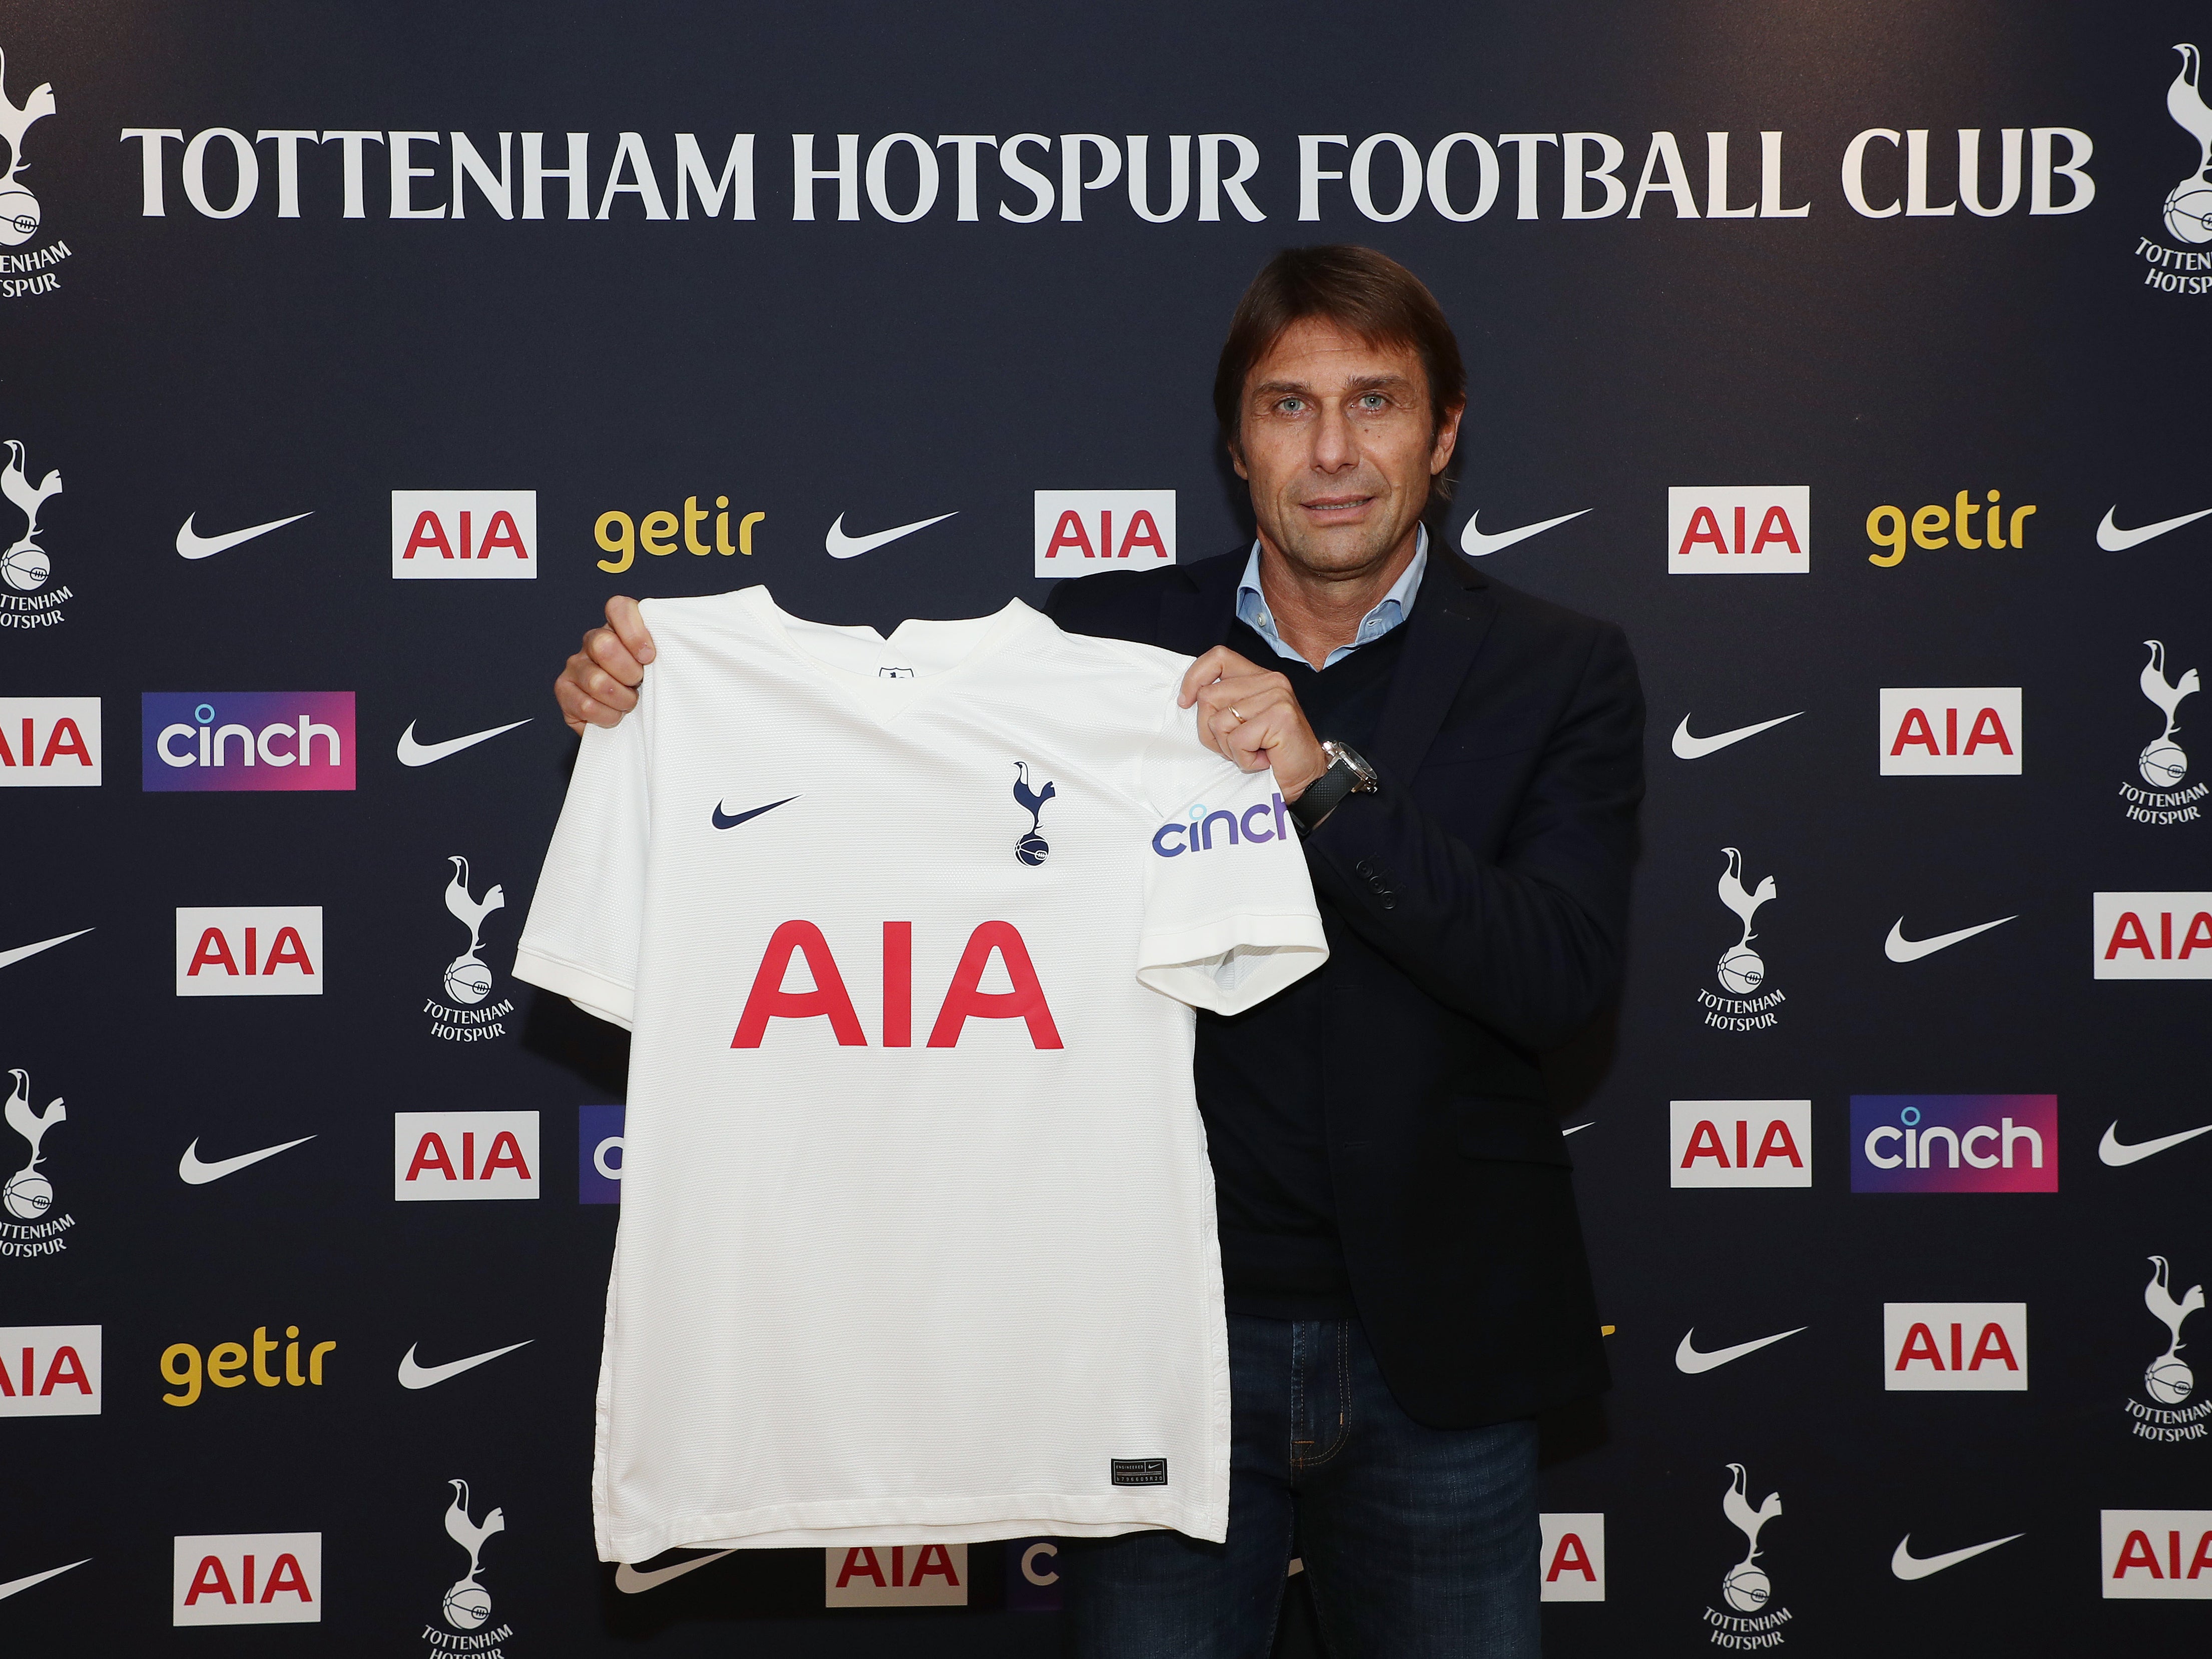 A History of Spurring? The Story of Tottenham Hotspur FC